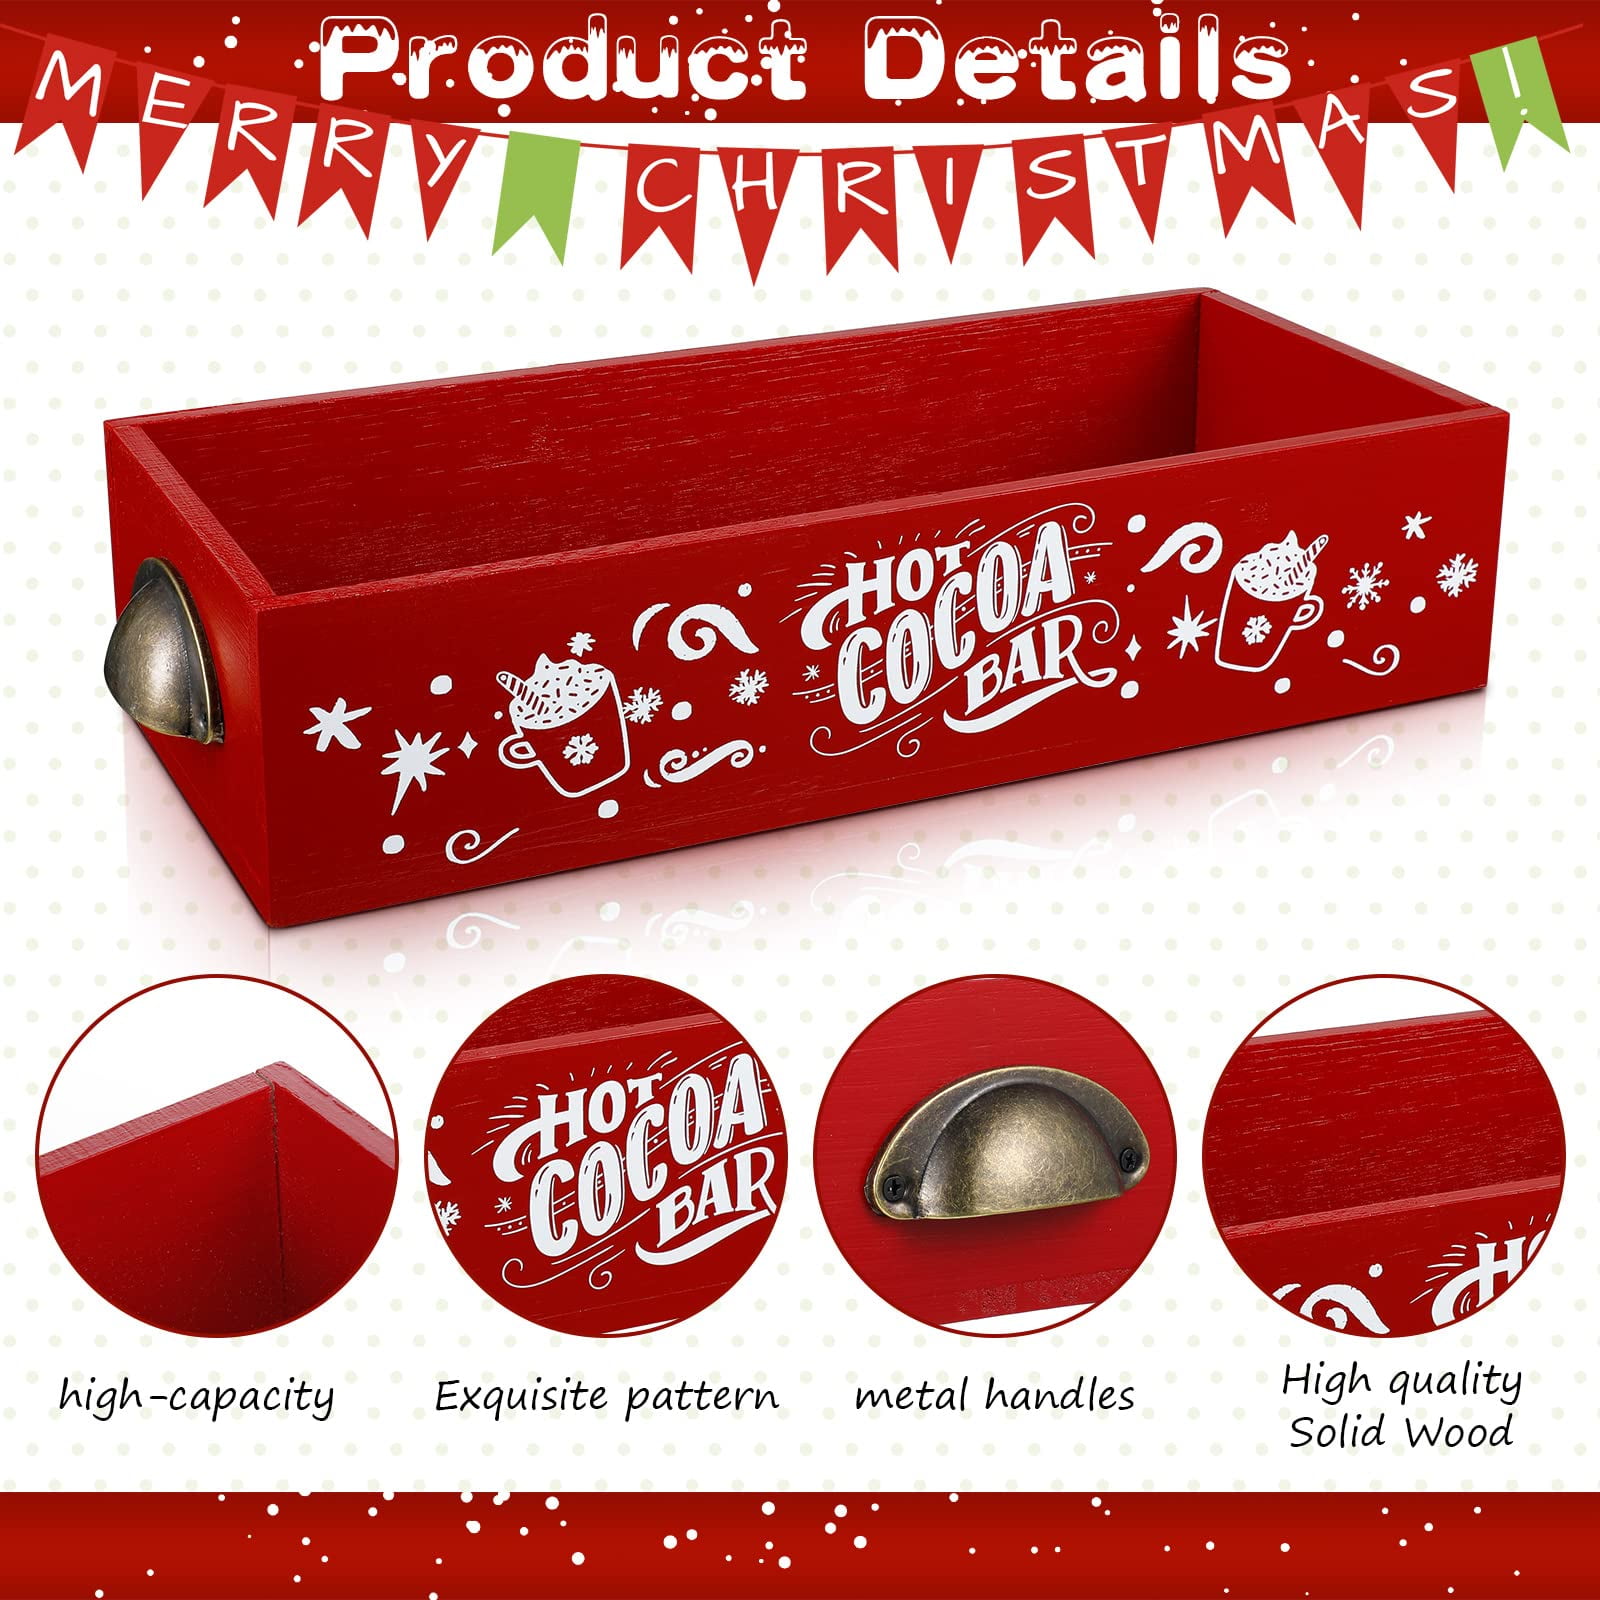 Geetery Christmas Hot Cocoa Bar Wood Station Organizer Countertop with 4  Compartment Cocoa Decorative Storage Bins Vintage Open Holder Box for Xmas